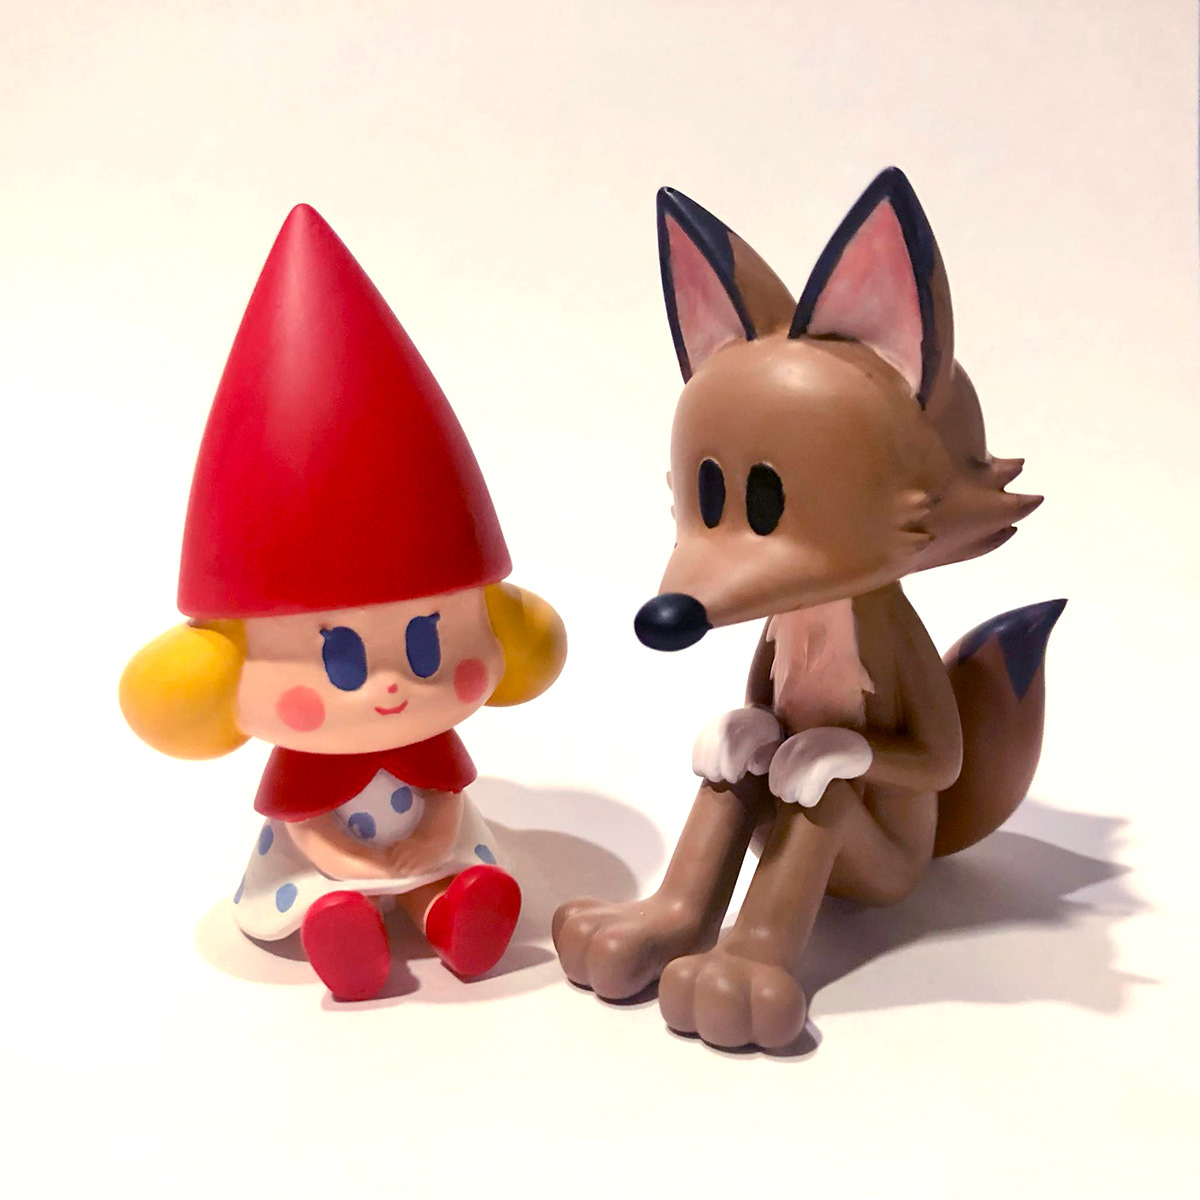 art toy Love ILLUSTRATION  Digital Art  concept toys toy Charactor Design red loving wolf